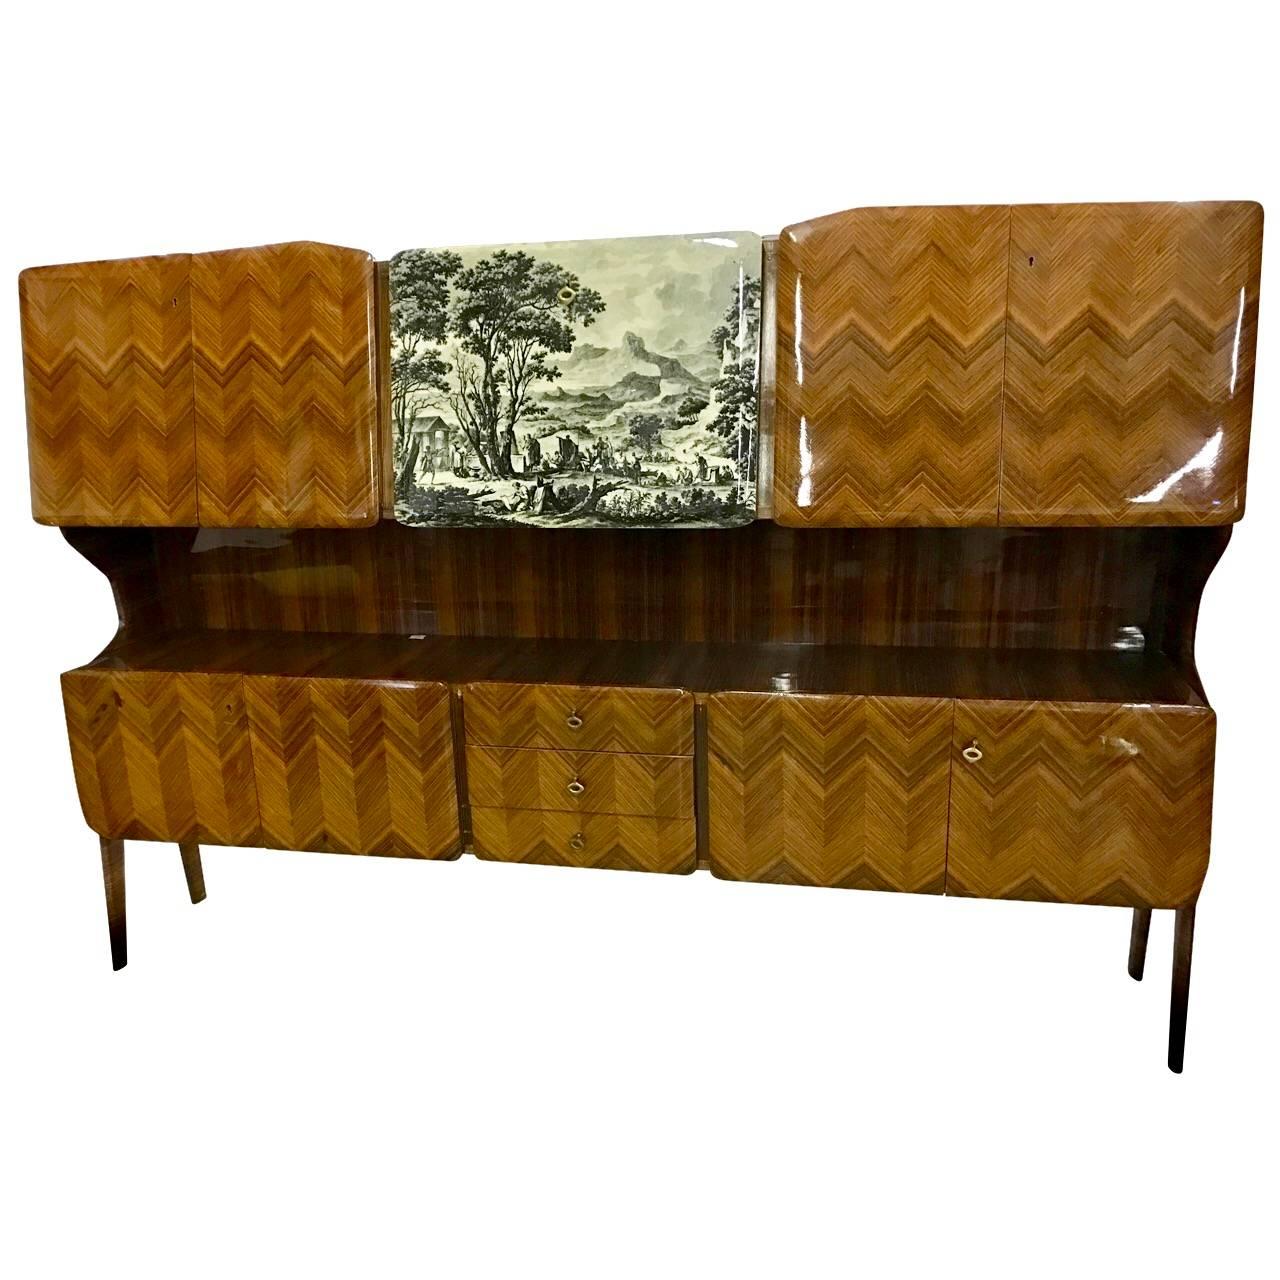 This rare cabinet in the style of Gio Ponti and Piero Fornasetti by Vittorio Dassi was made in Milano in the early 1950s and before 1954.

The rosewood veneered wall unit can be used as a sideboard or an dry bar. The sideboard has a drop-down door